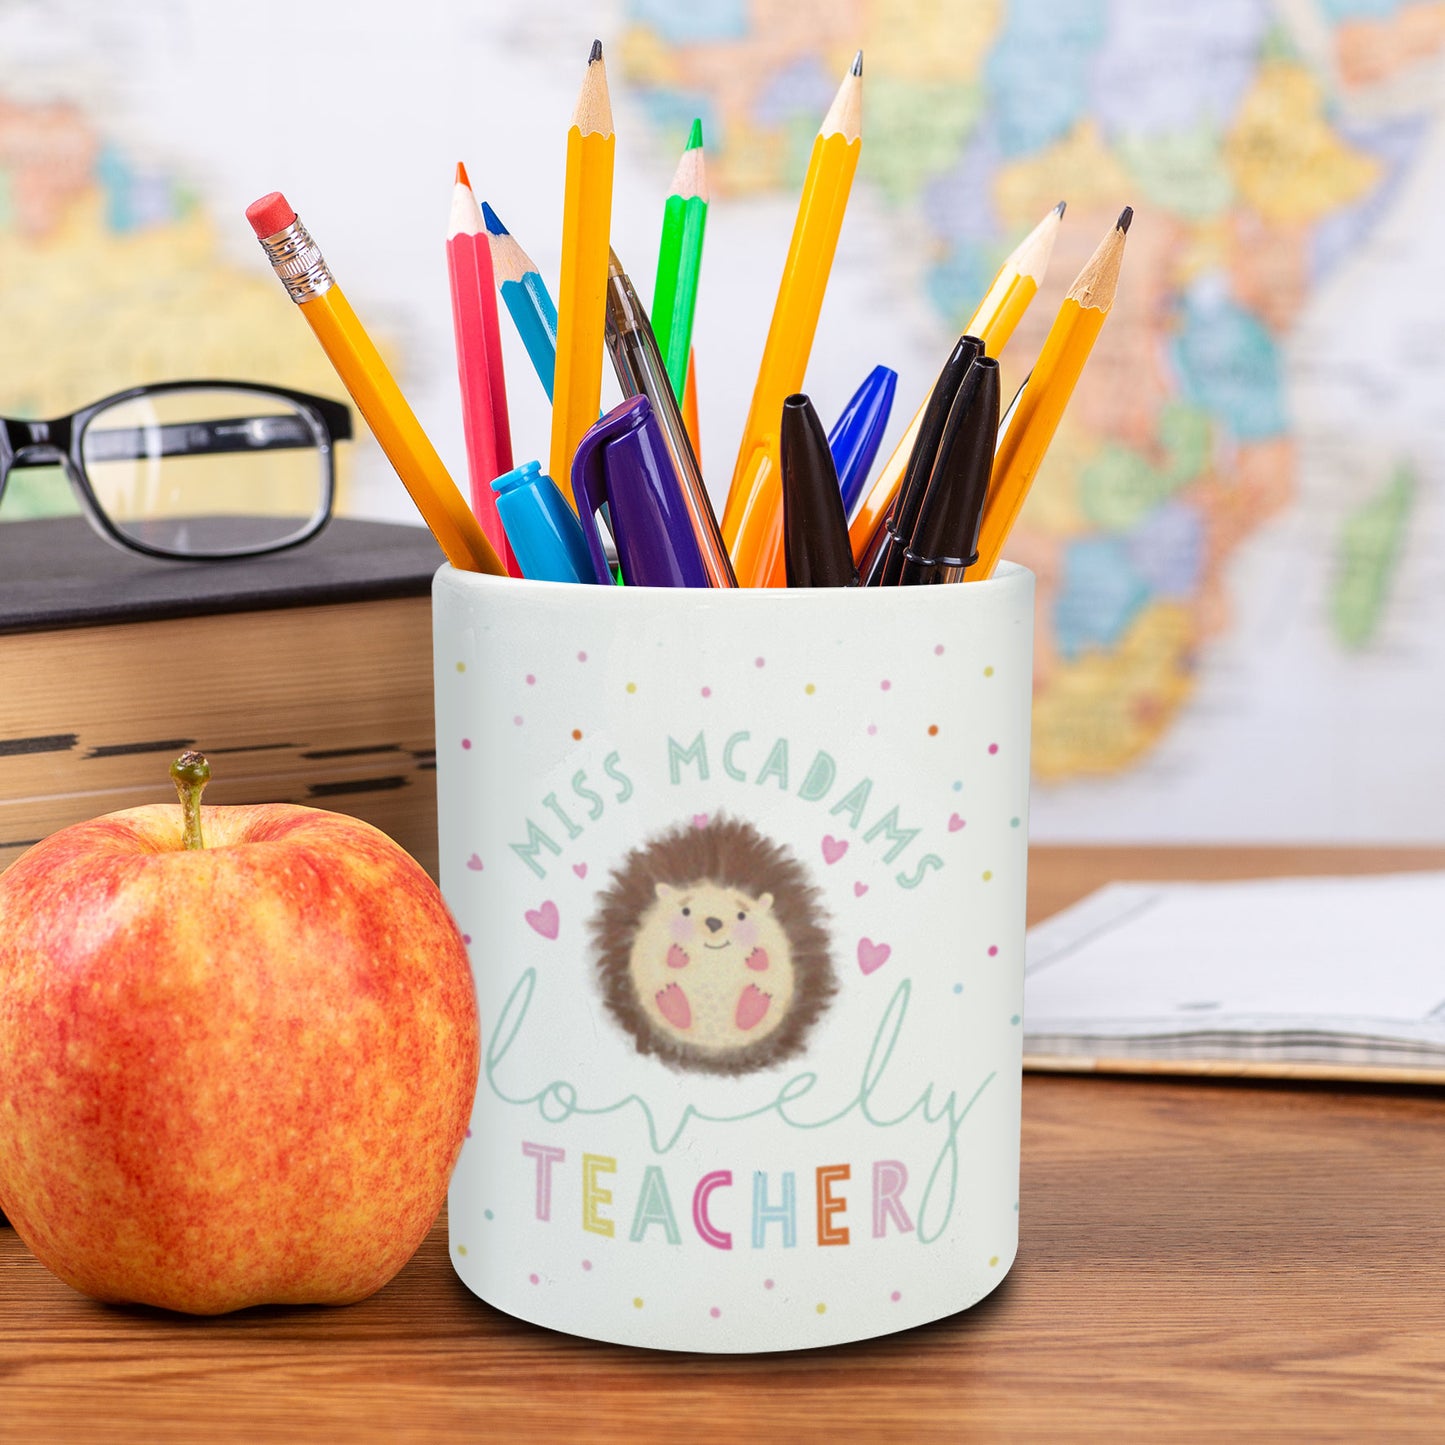 Hedgehog lovely Teacher, Teaching Assistant Personalised Pencil Pot | Thank you teacher gift | Teacher Desk Organiser Gift | Personalised Teacher Gift